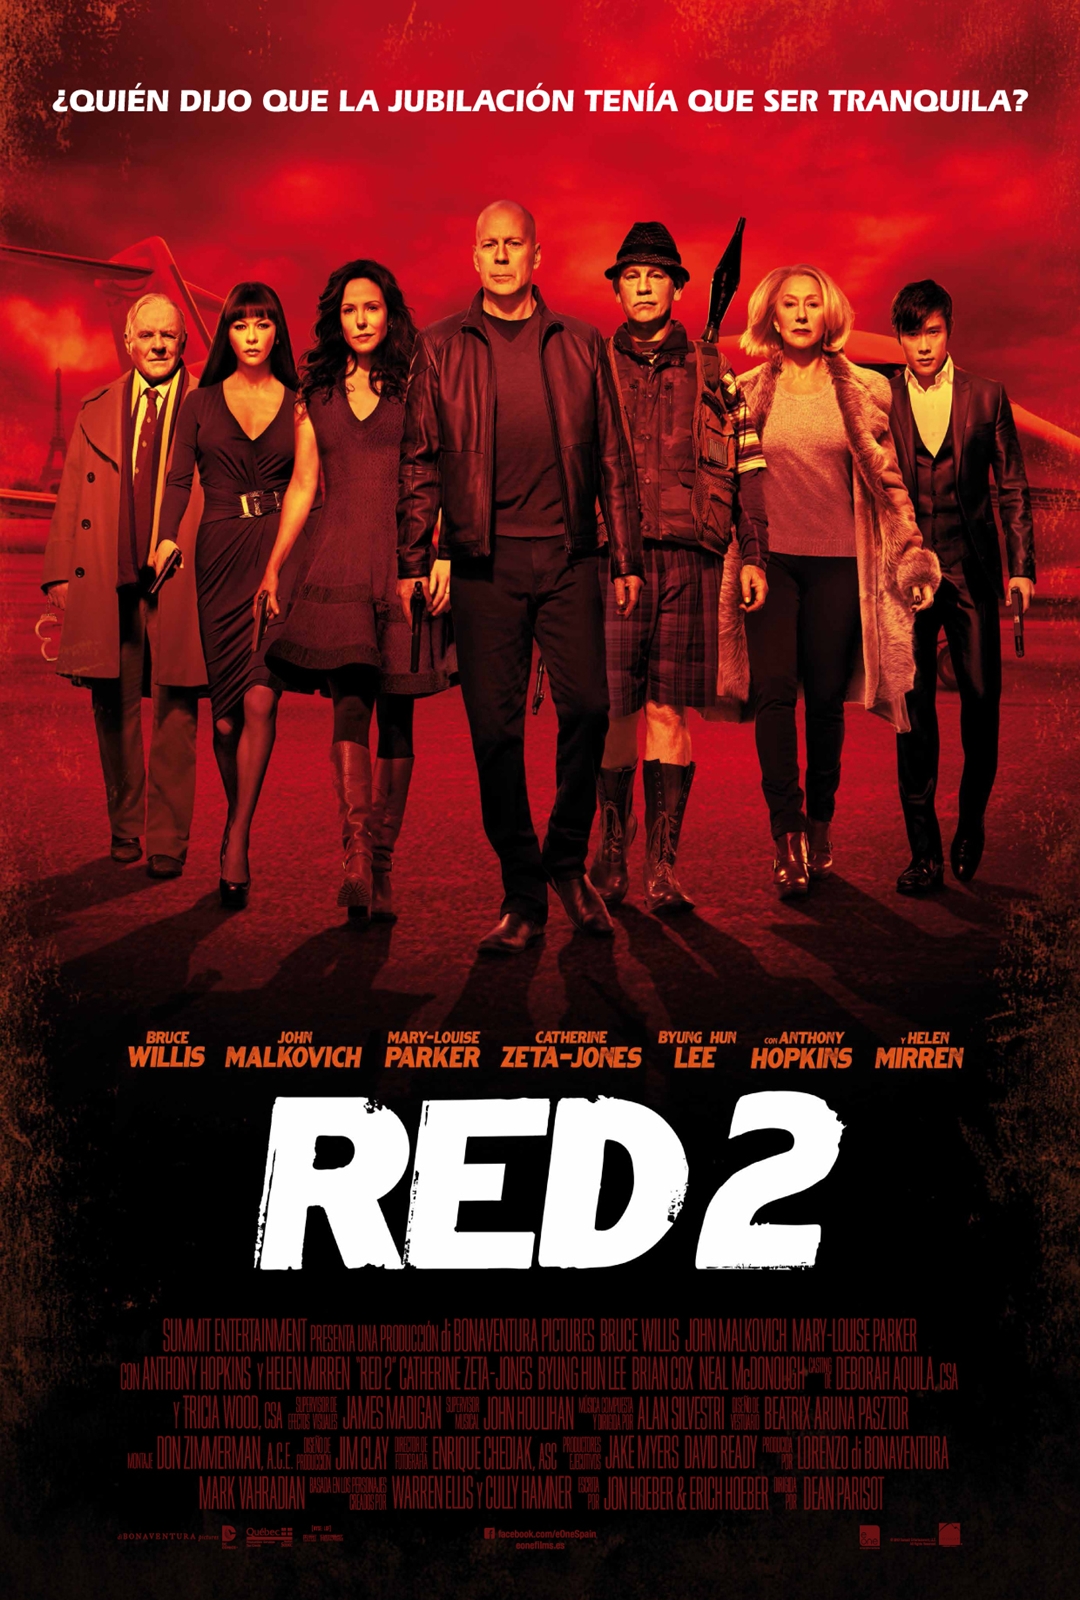 Red 2 DVD Cover